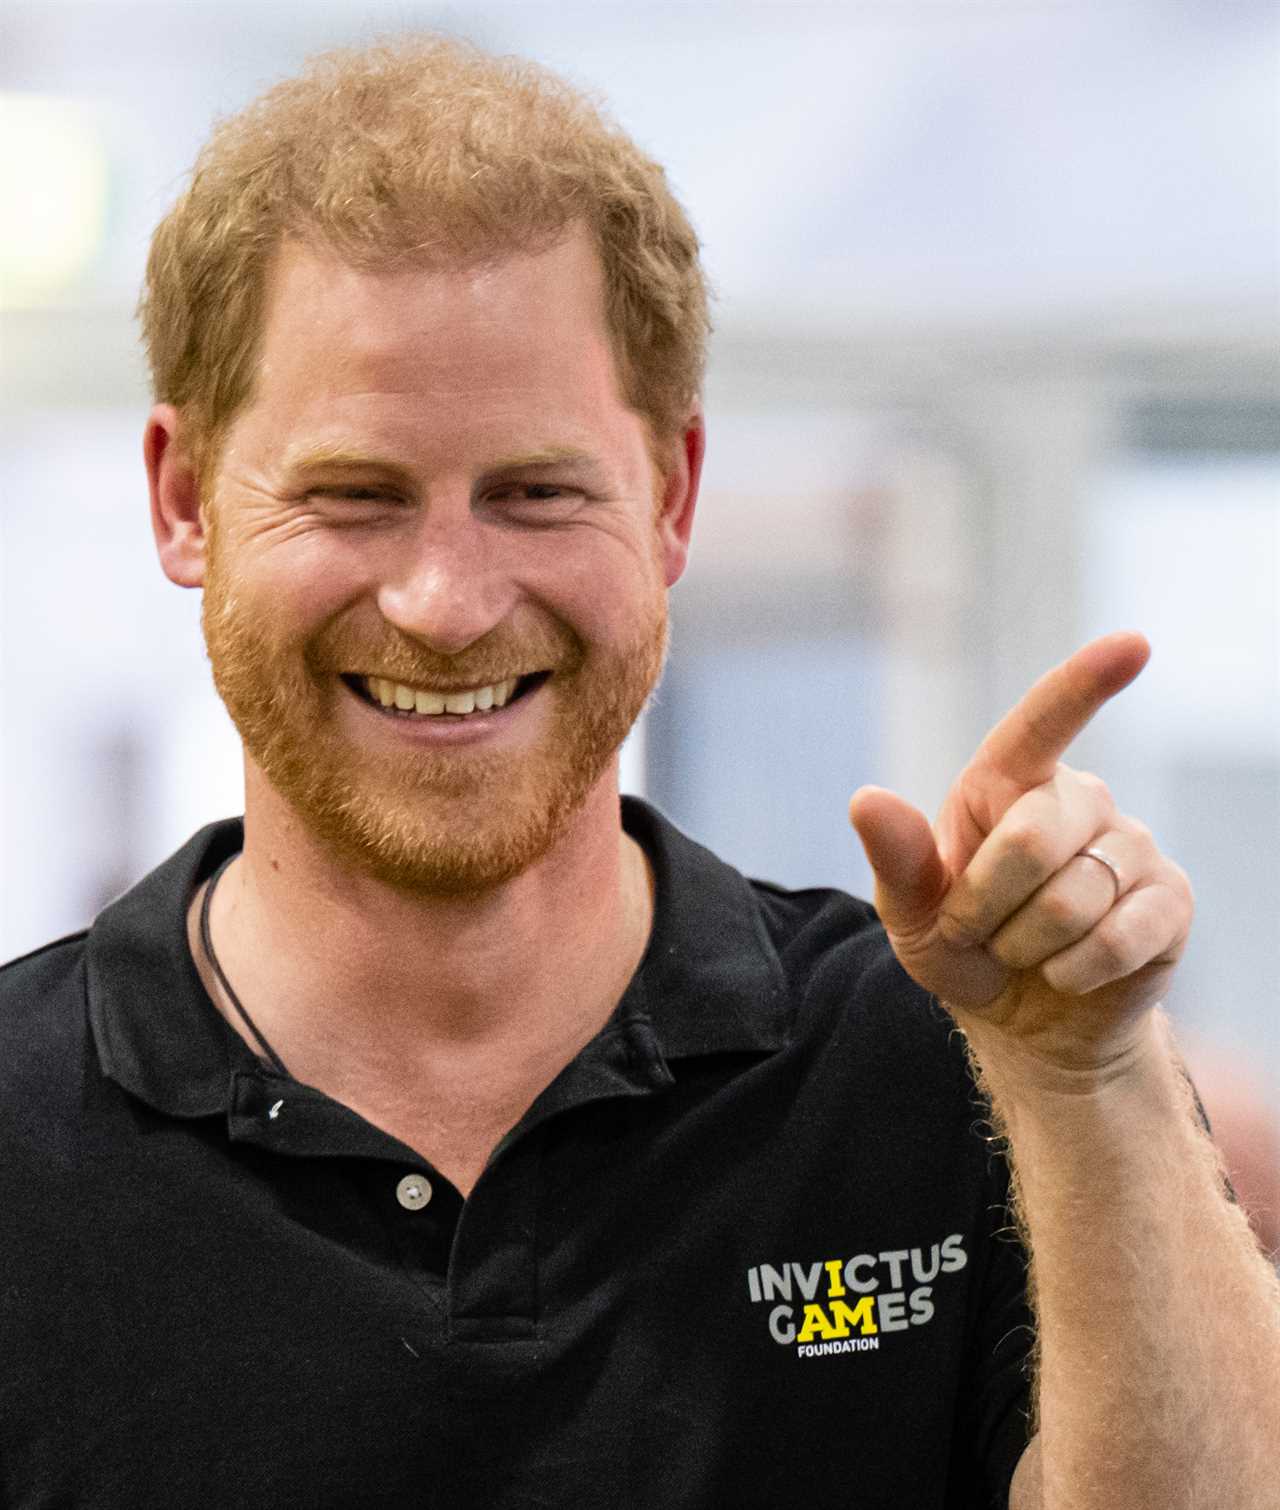 What are the Invictus Games and why did Prince Harry found it?